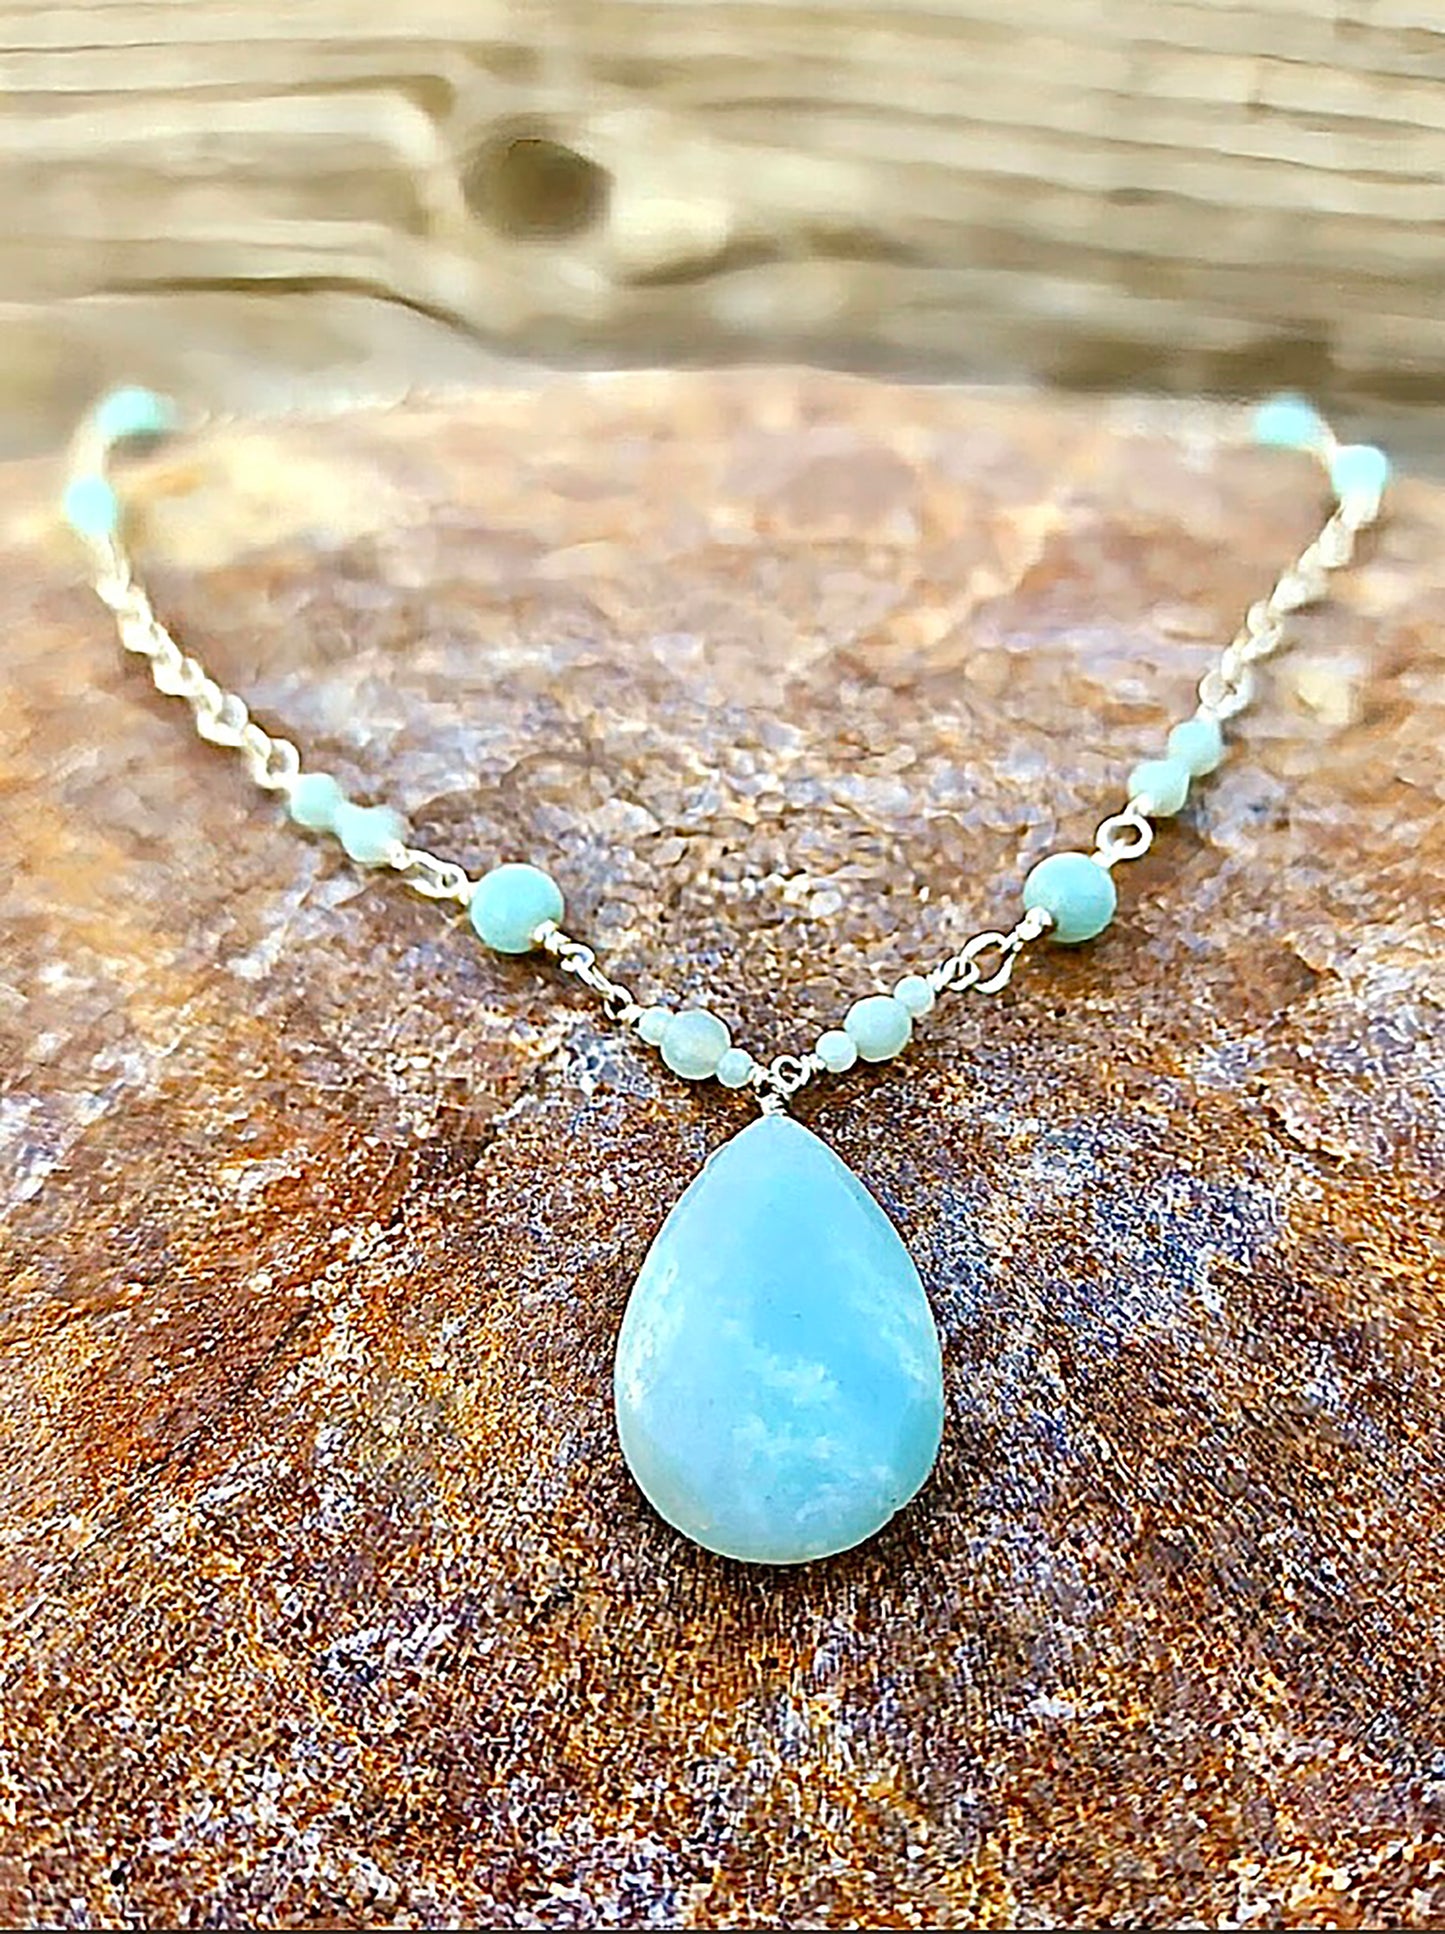 Treasured by the ancient Egyptians, Amazonite has always been prized for its beauty, healing power, and encouraging good luck and fortune.  Wire wrapped chain with amazonite beads interspersed and 1.25" drop.  Length: 20".  Available in silver or gold filled.